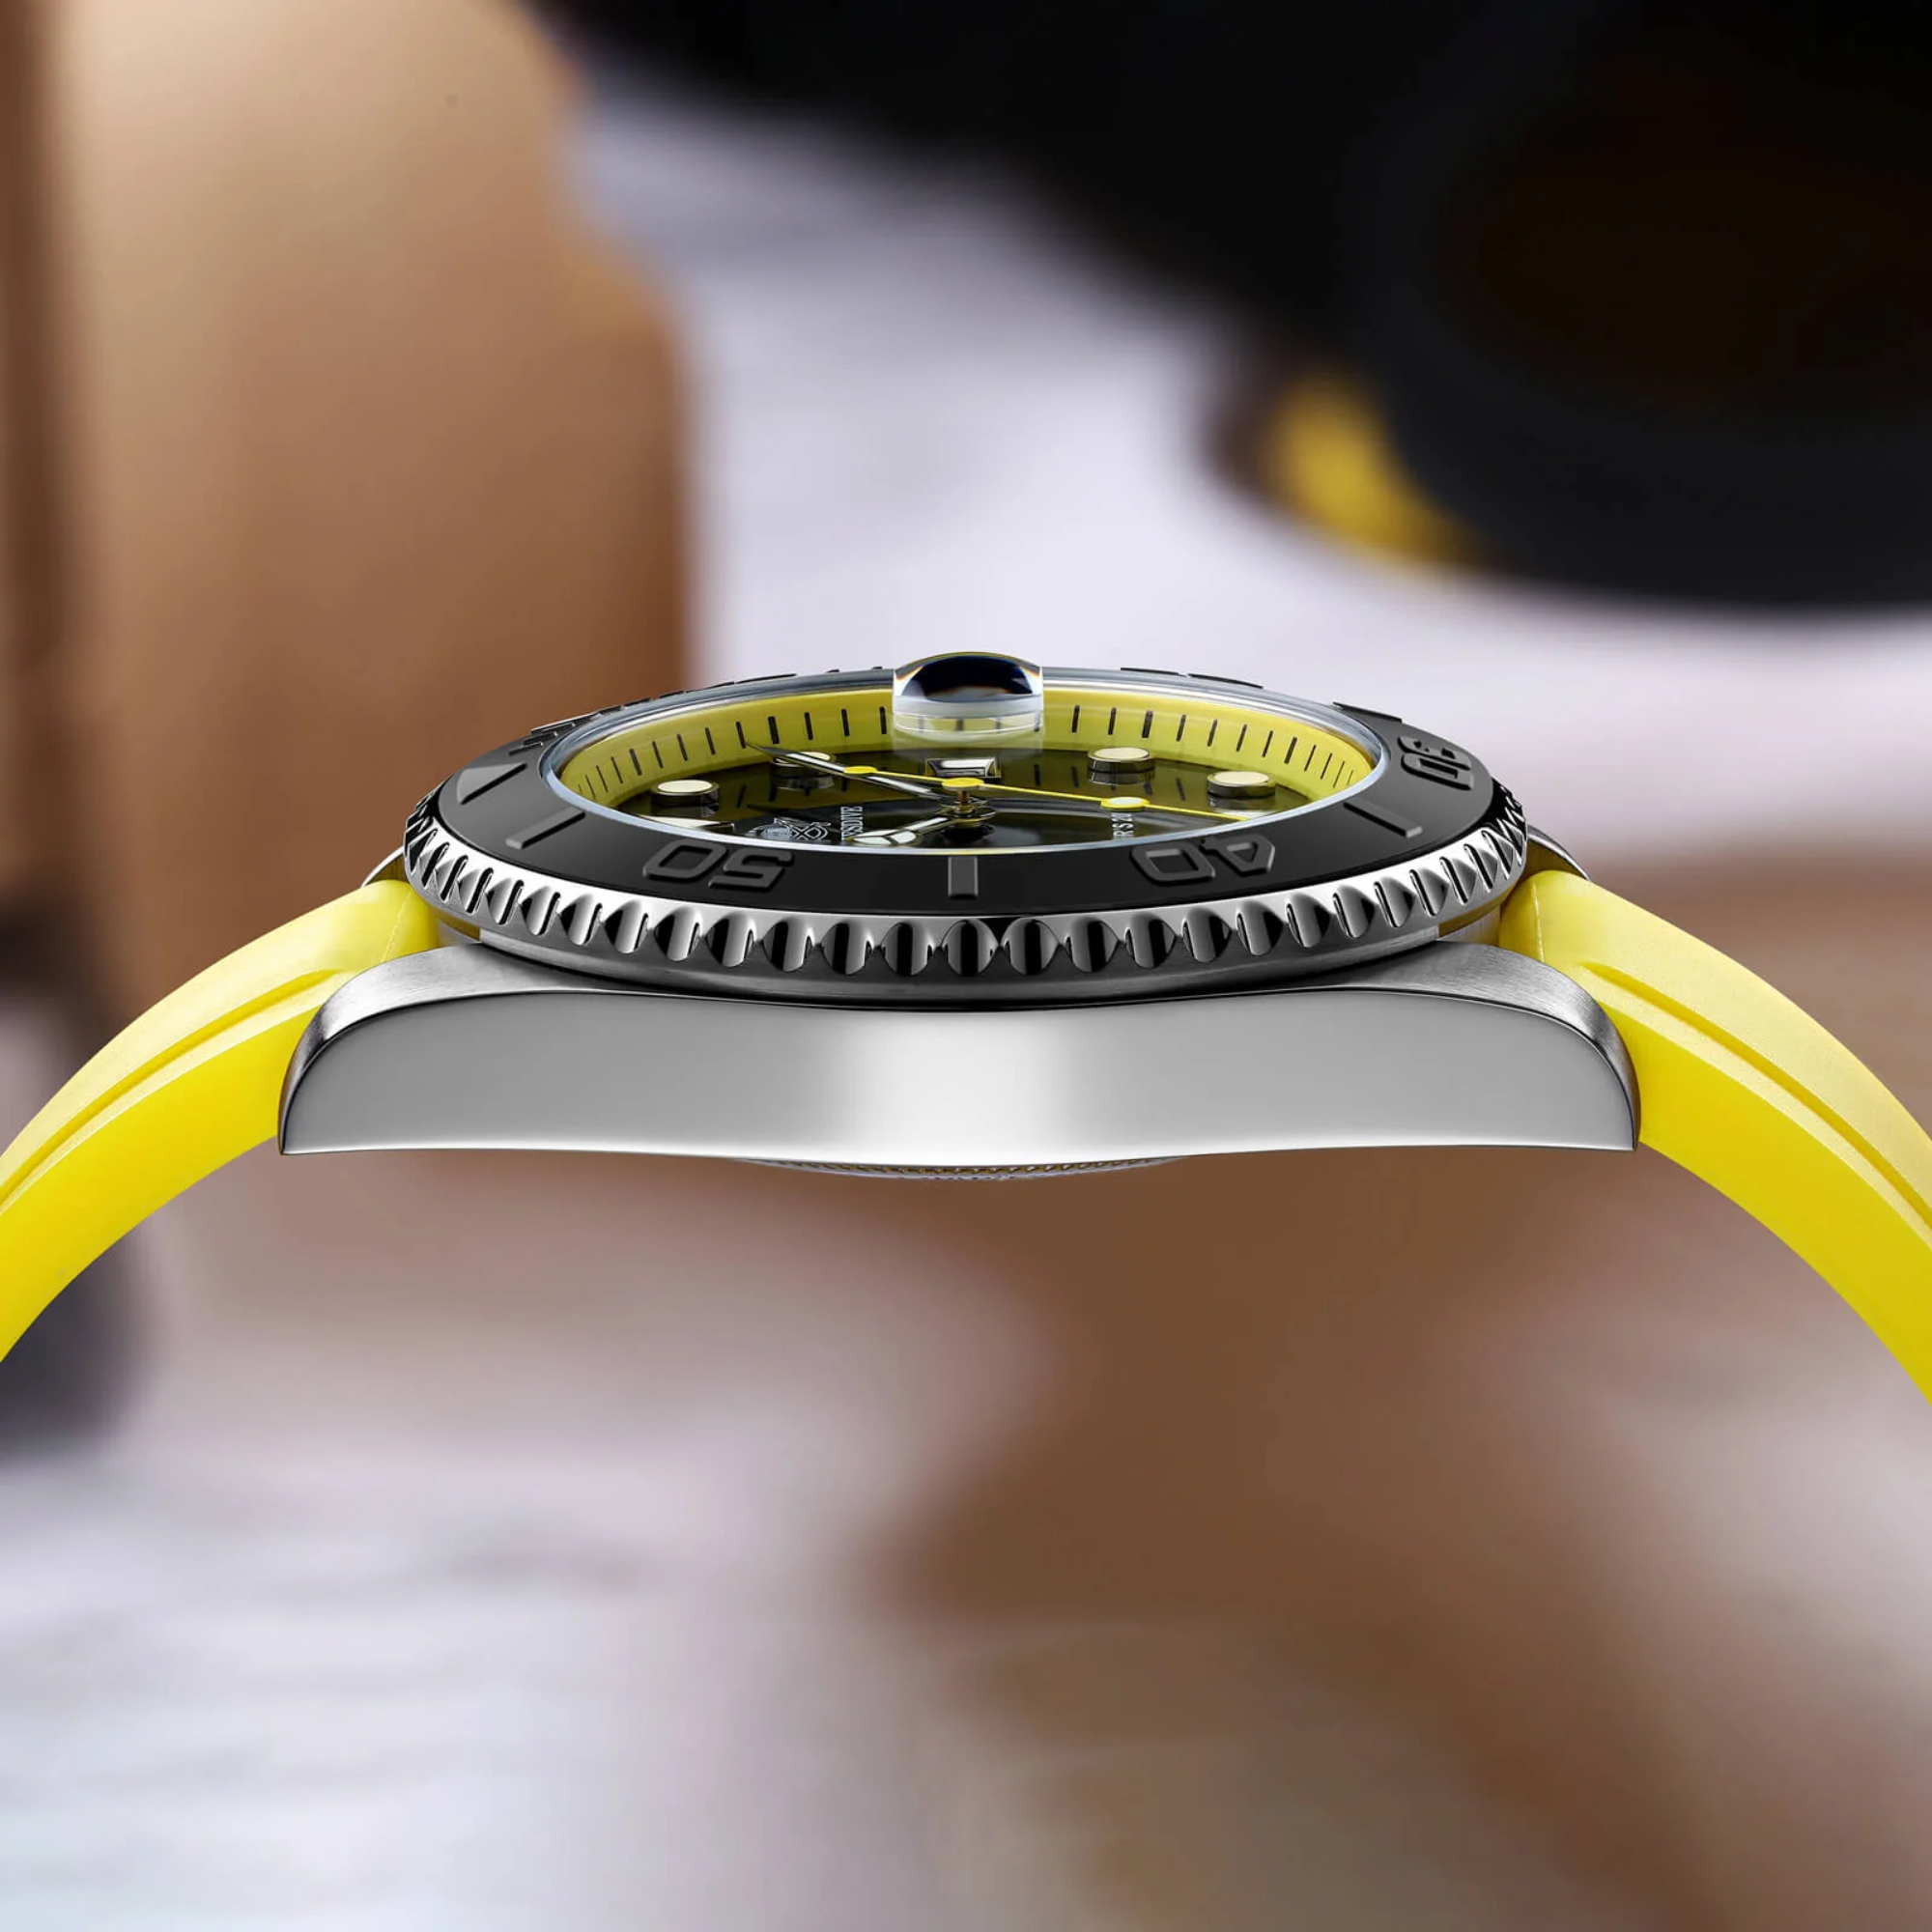 High End Curved FKM Rubber Watch Band With Oyster Style Deployment Clasp: 20 Mm - Yellow With Gold Dual Tone